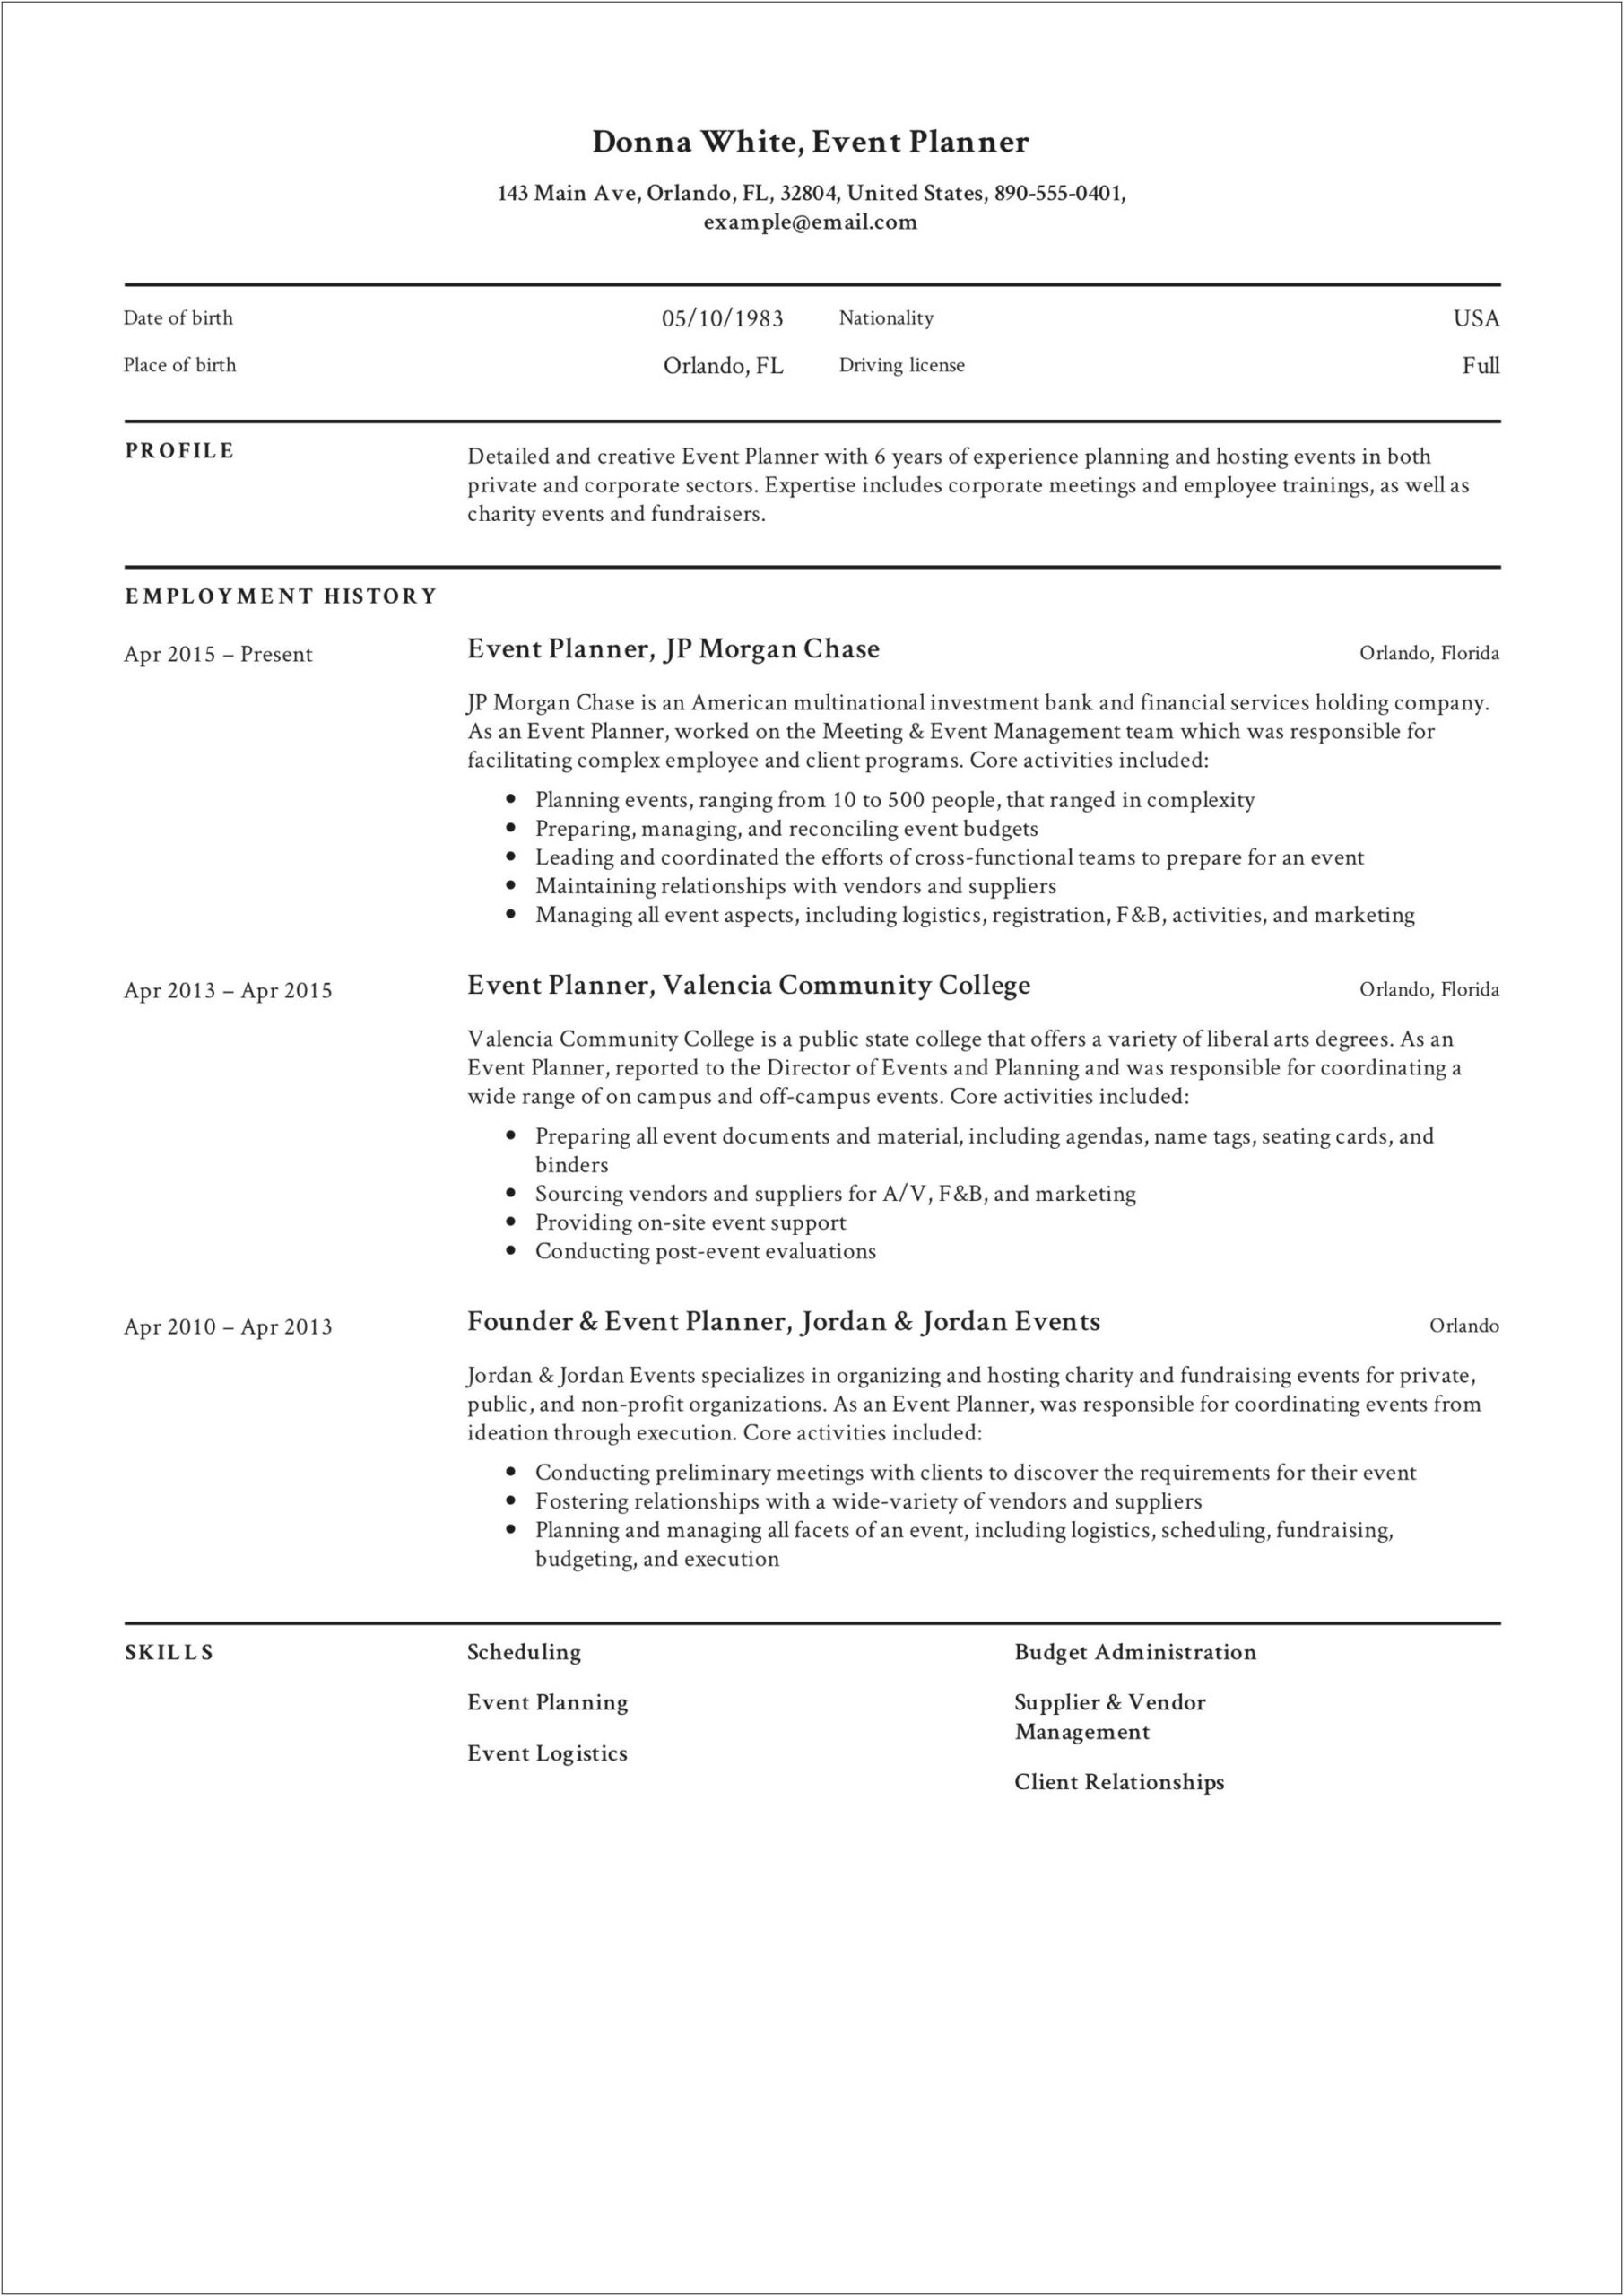 Resume Wording Office Ordering Event Planning